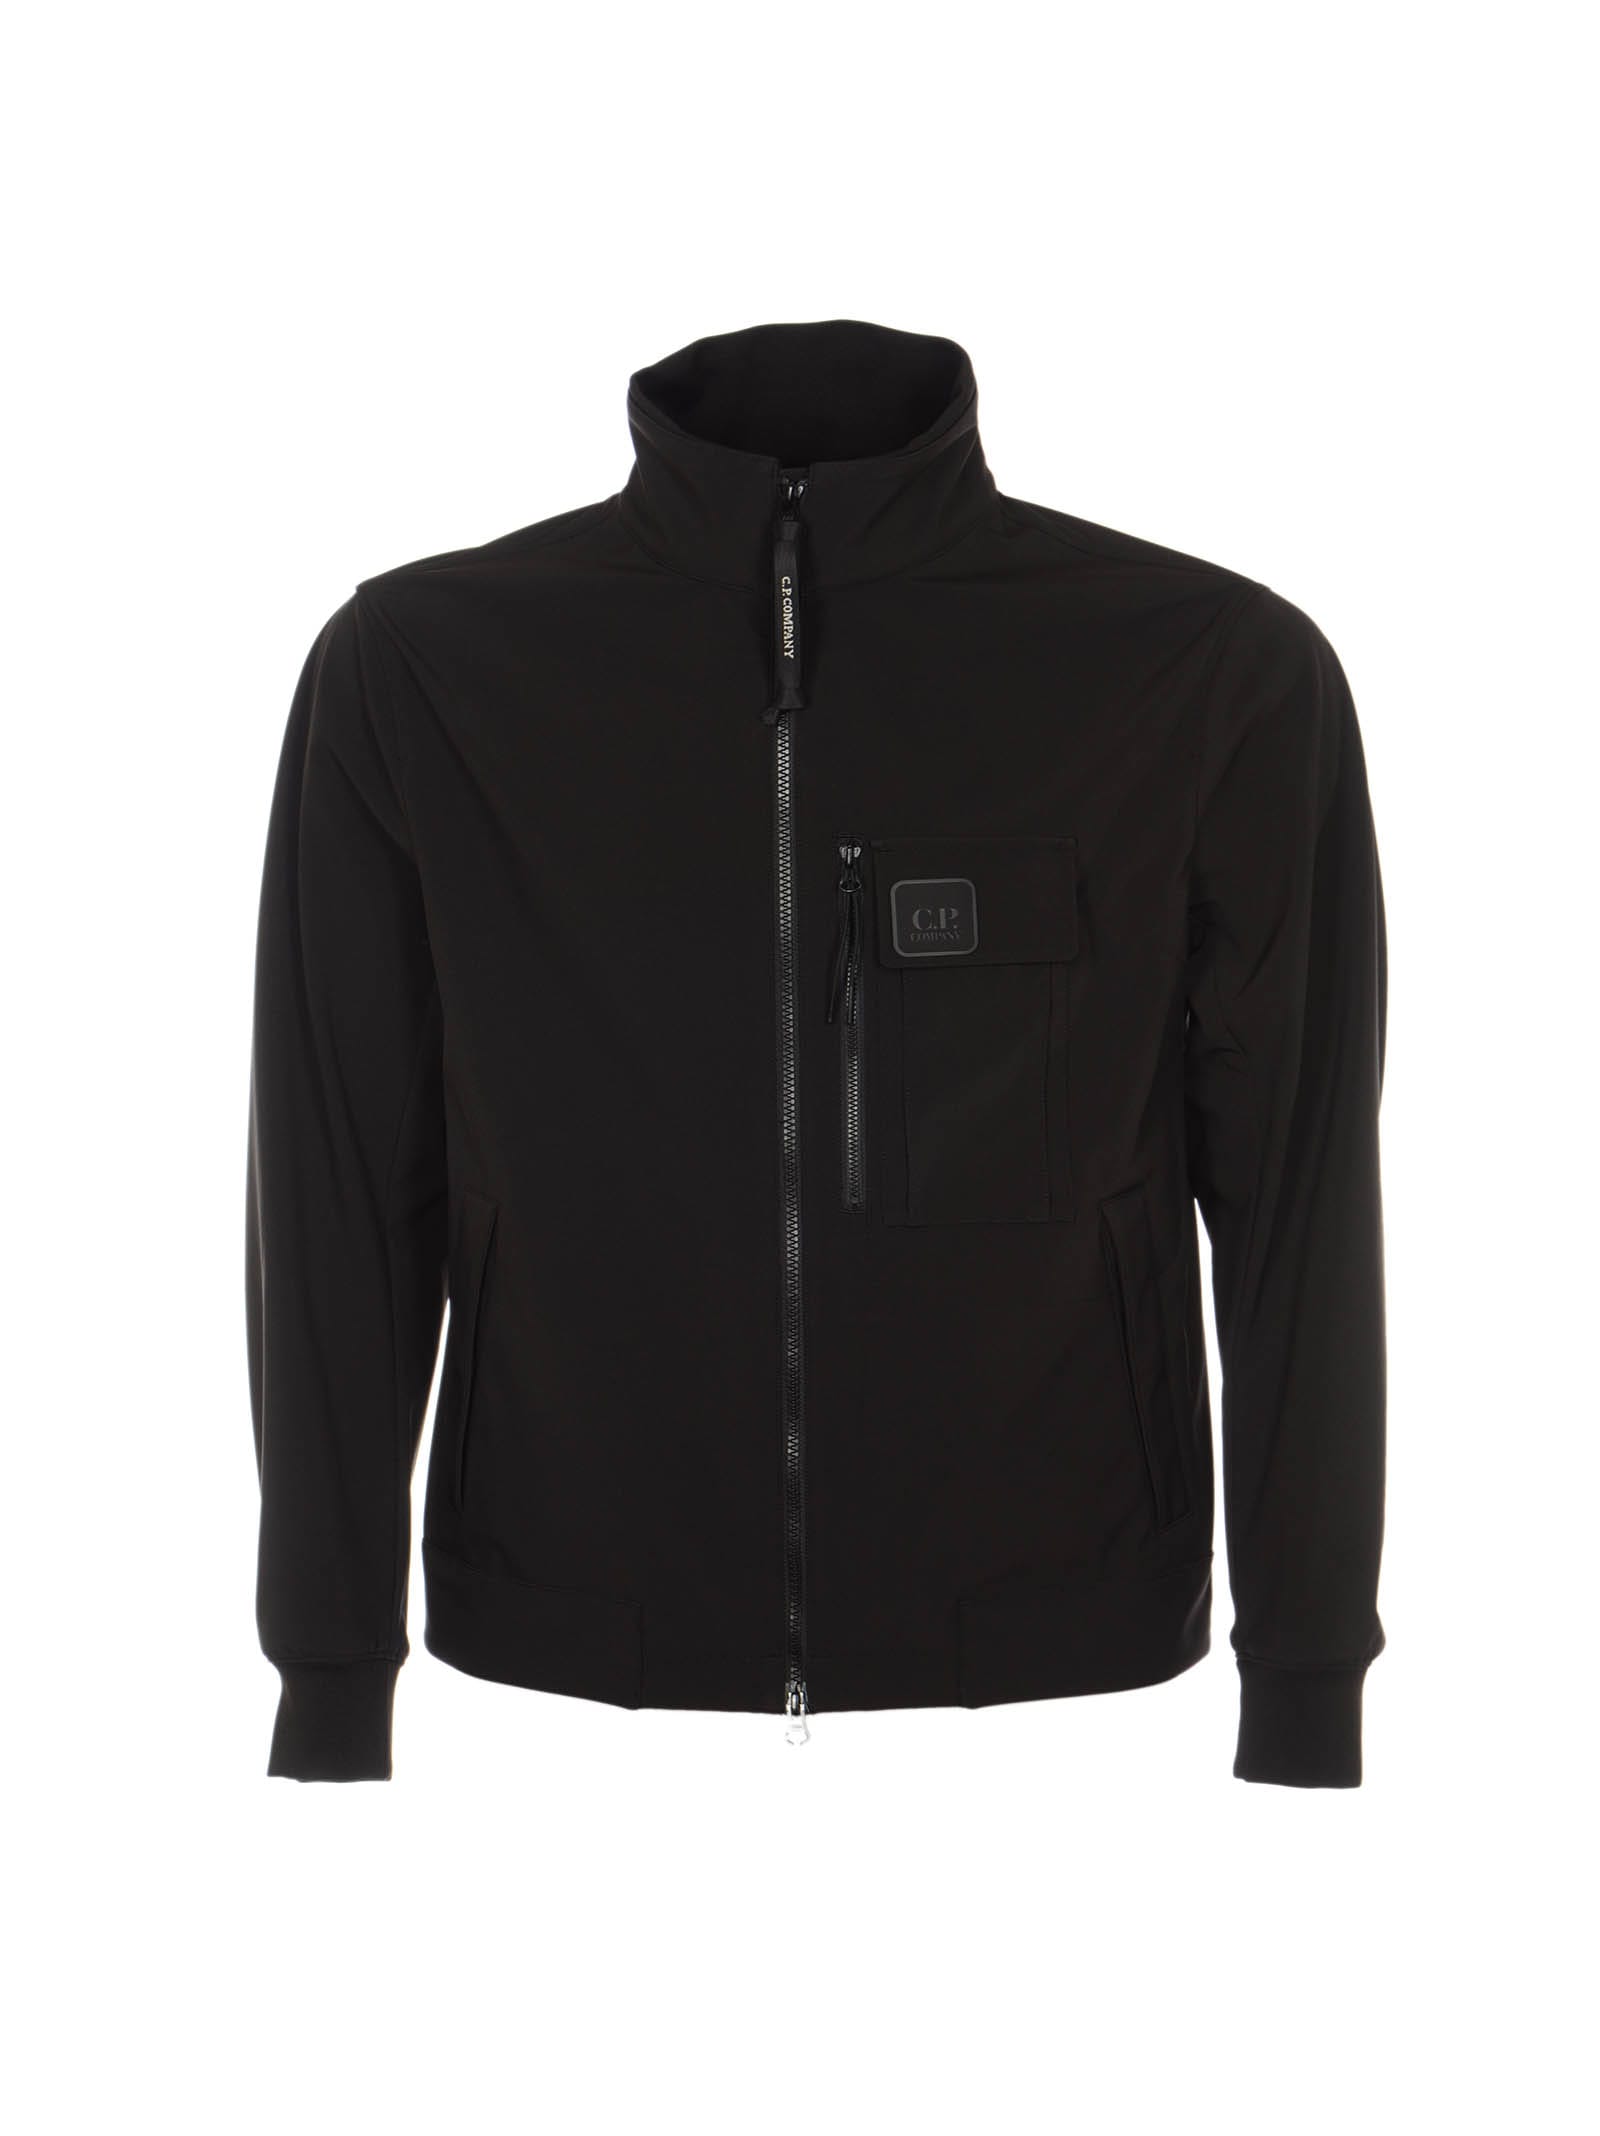 C.P. Company Recycled Polyester Jacket